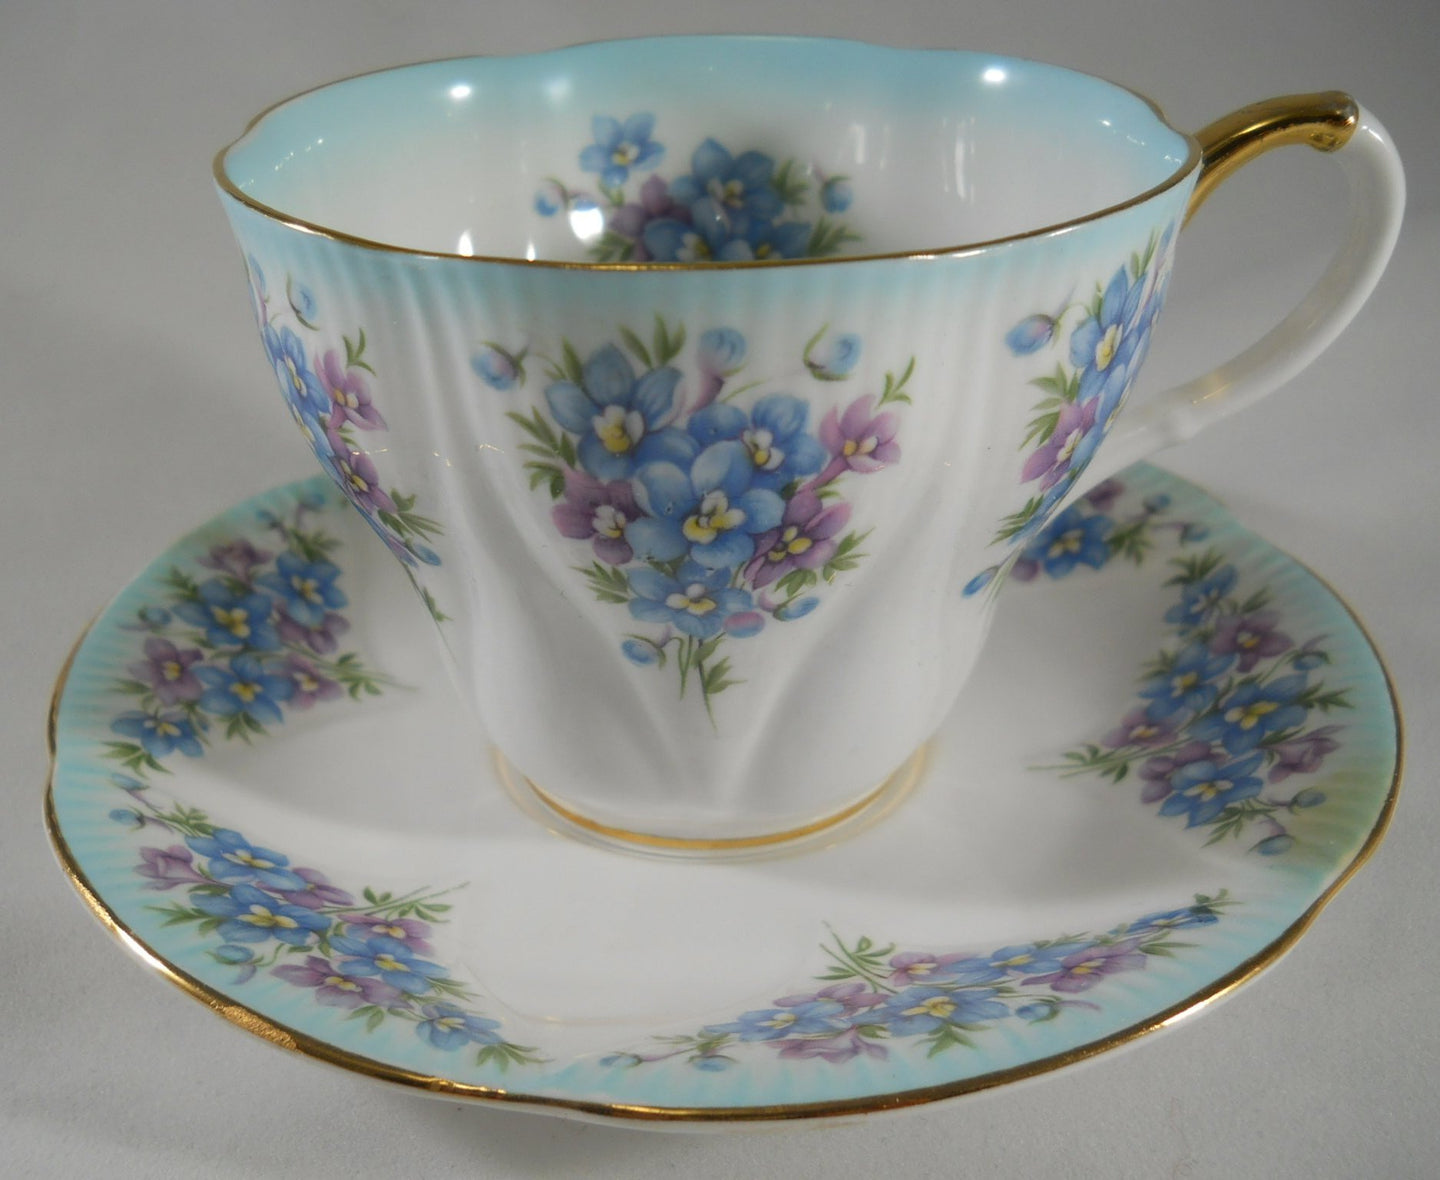 Royal Albert Dainty Dina Series Emily Blue and Purple Flowers Teacup and Saucer Set